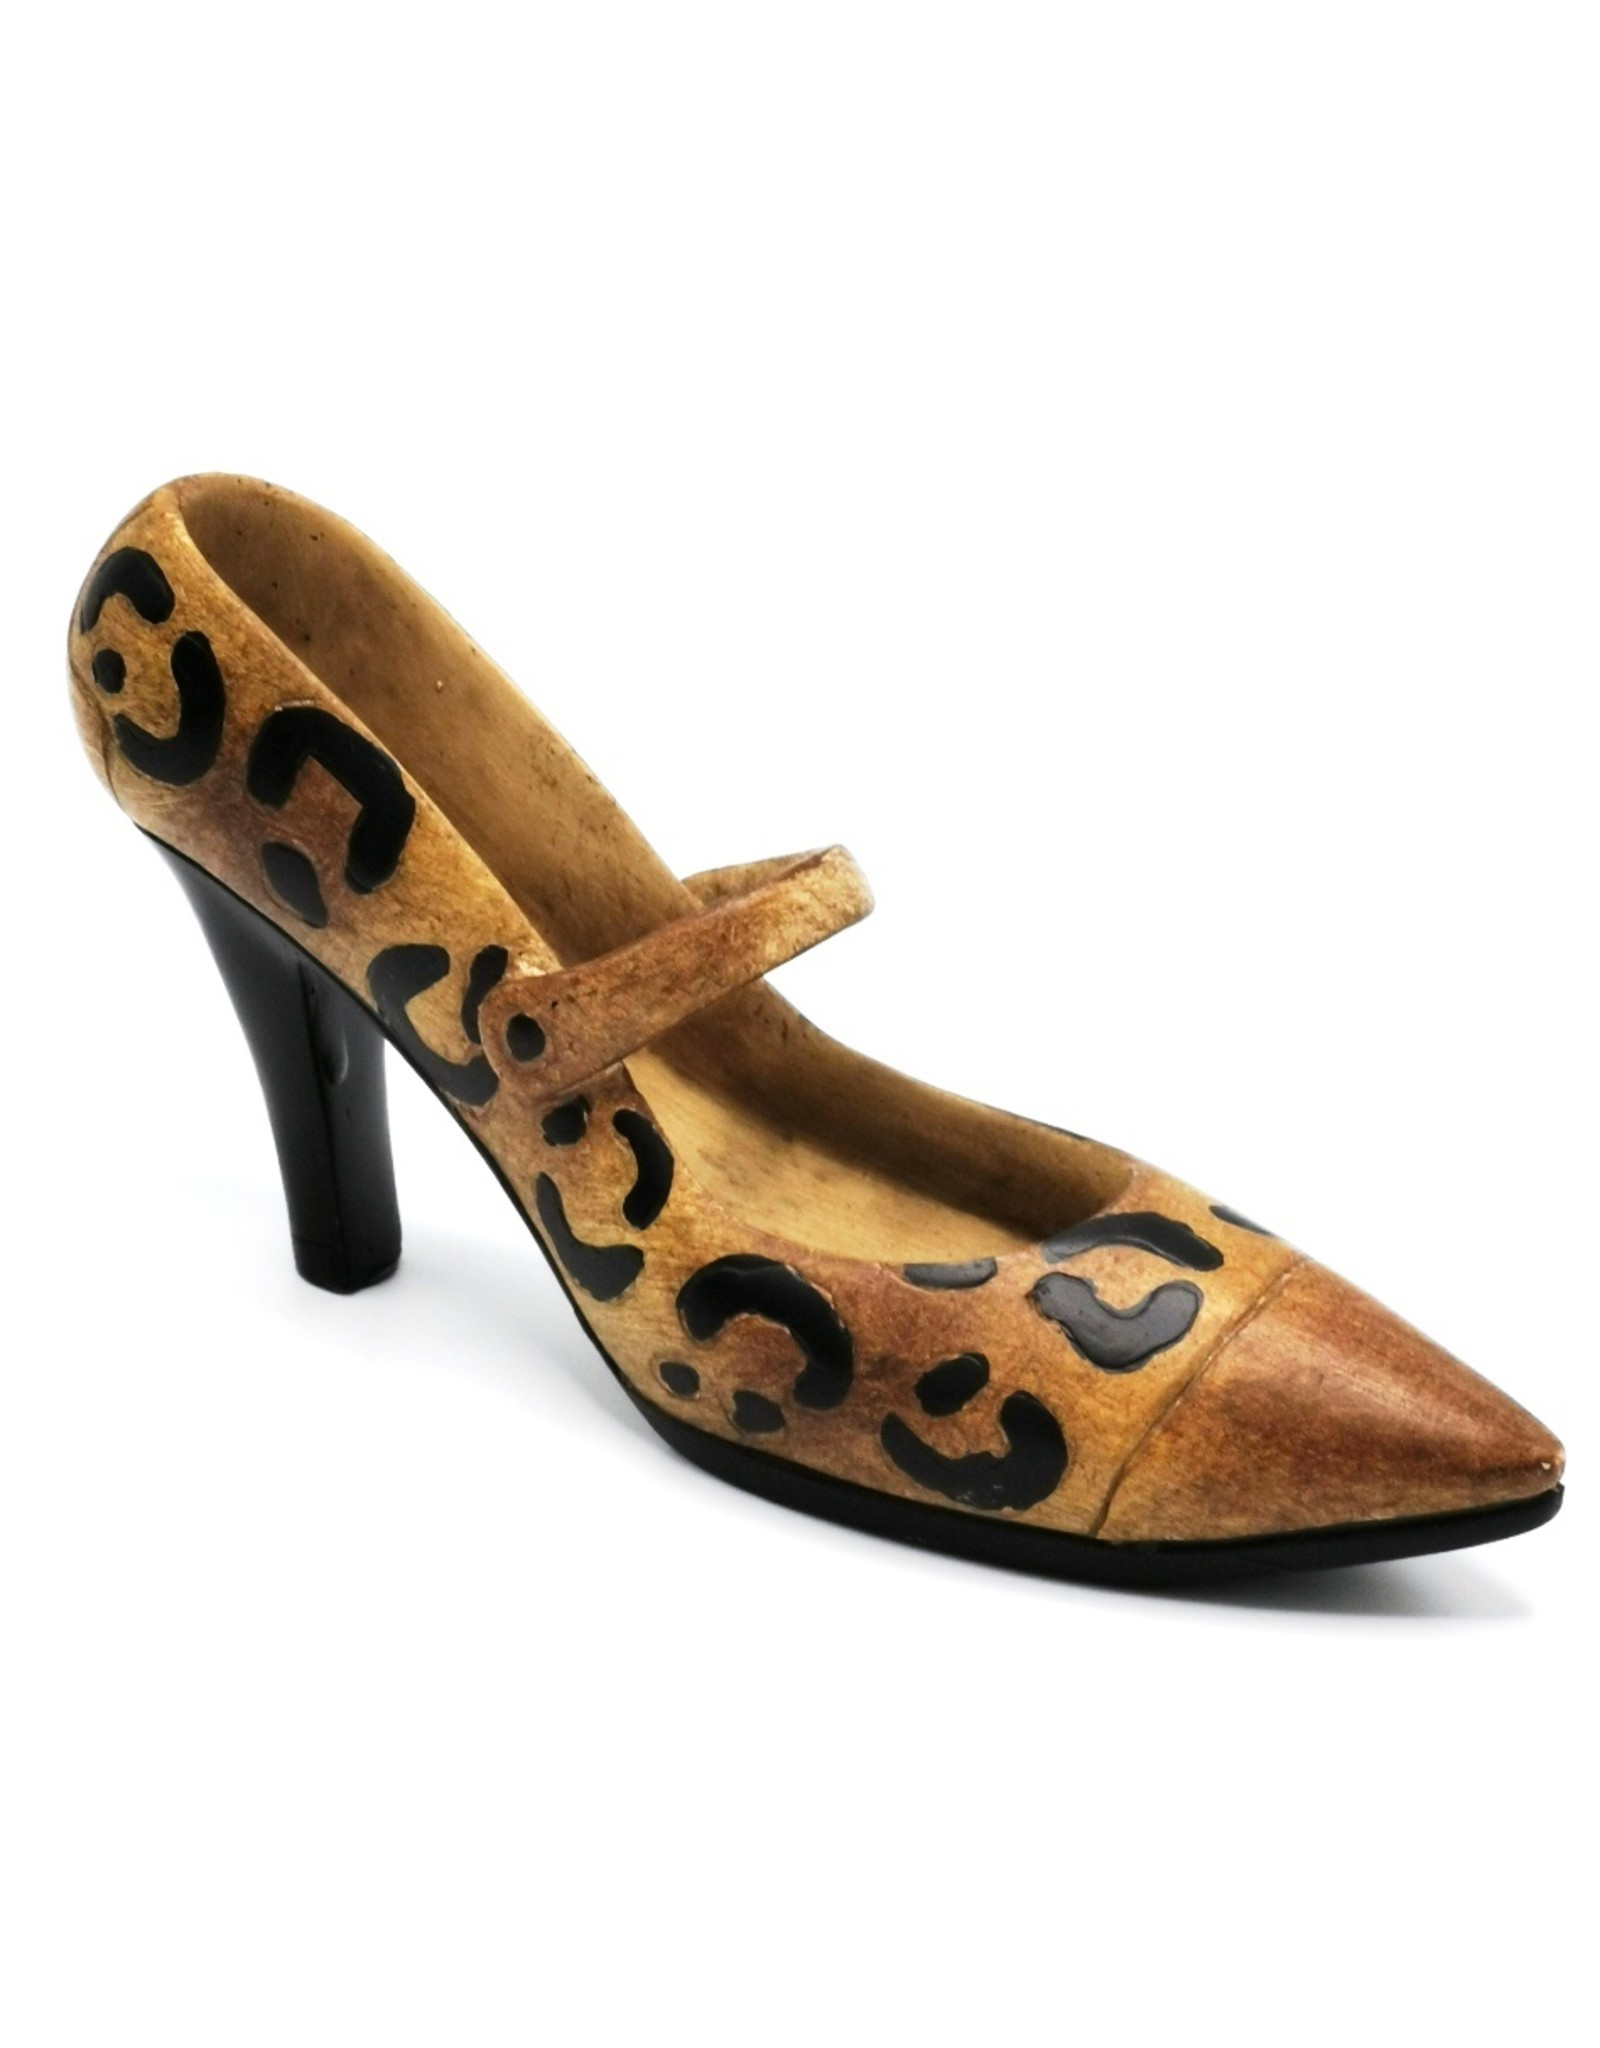 Dutch Style Giftware Figurines Collectables - Shoes with animal print decorative figurine